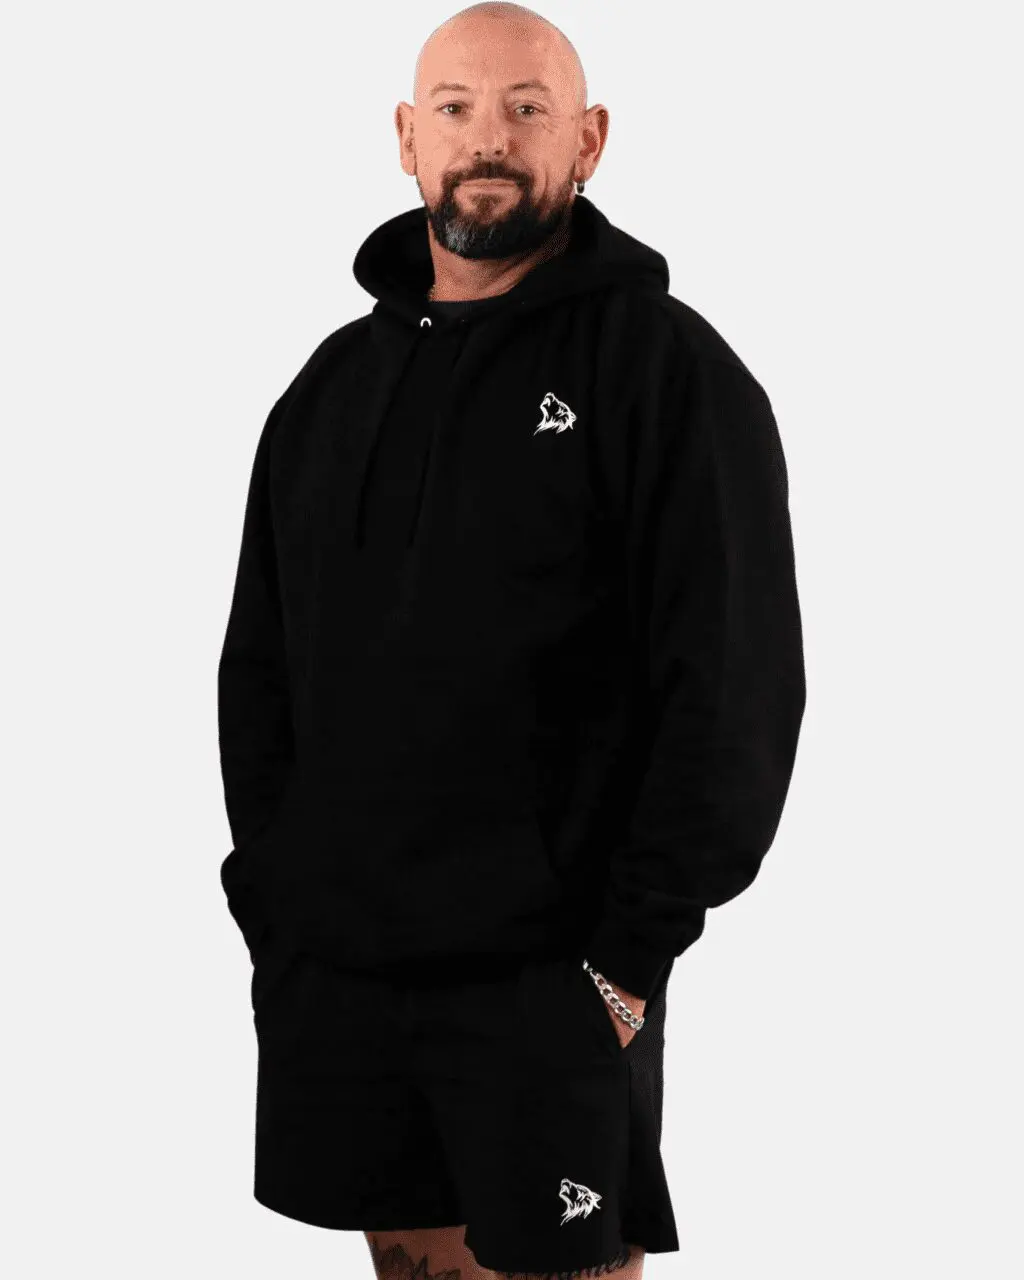 A man in black hoodie standing with his hands in his pockets.